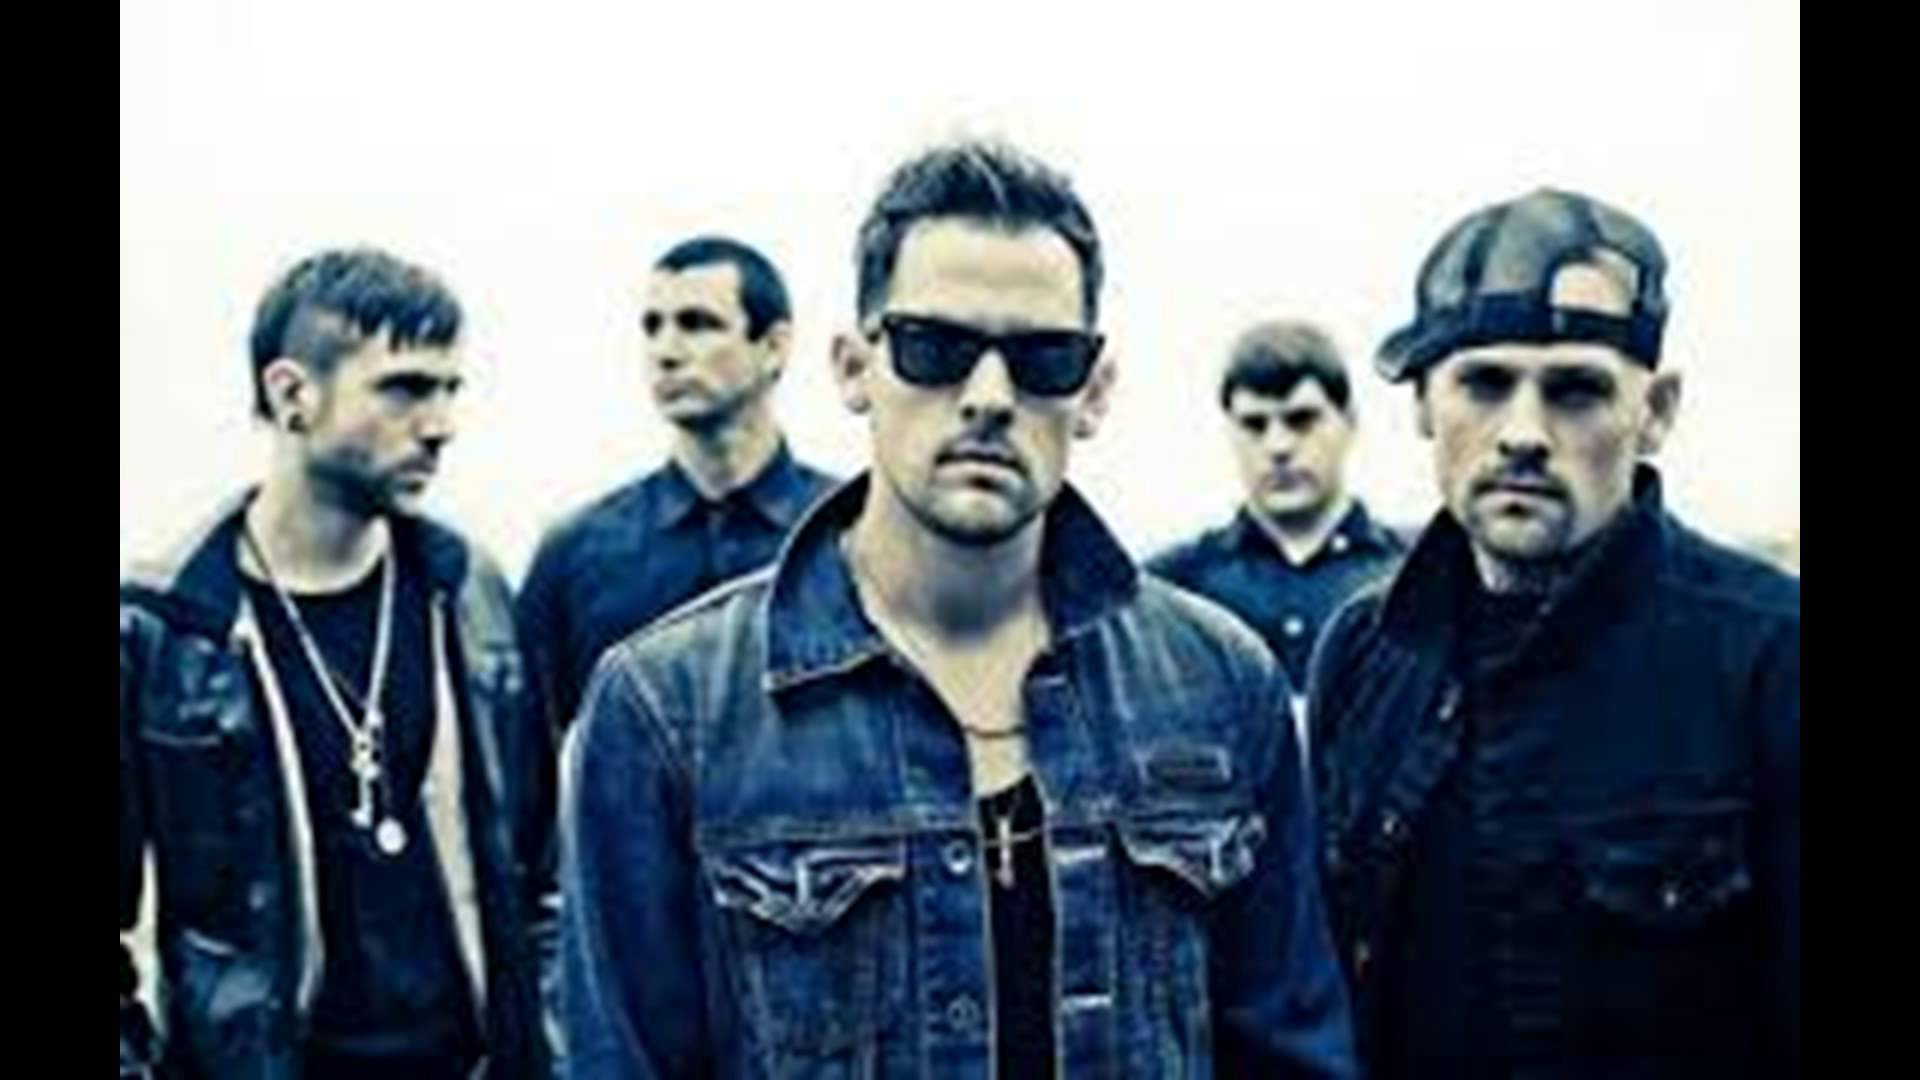 Good Charlotte Wallpapers